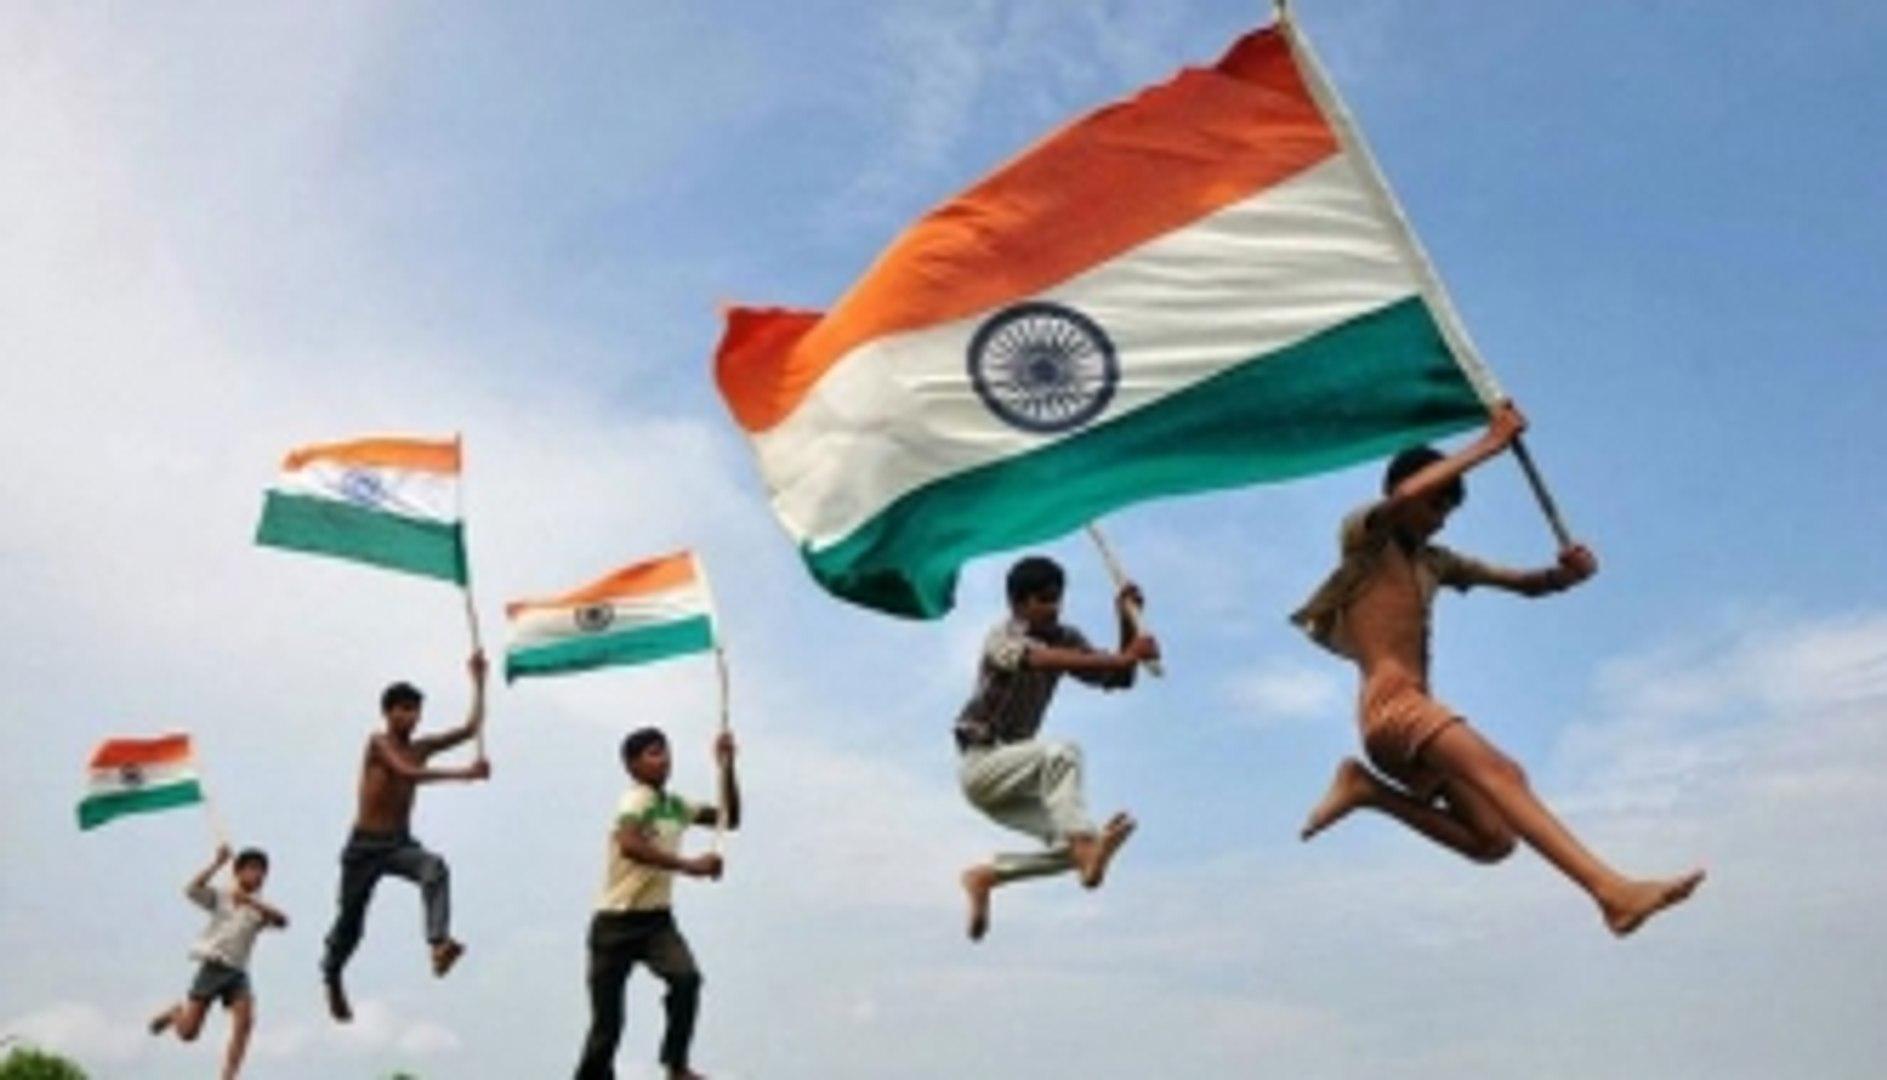 India made Guinness Record for synchronic Waving of More than 78,000 National Flags